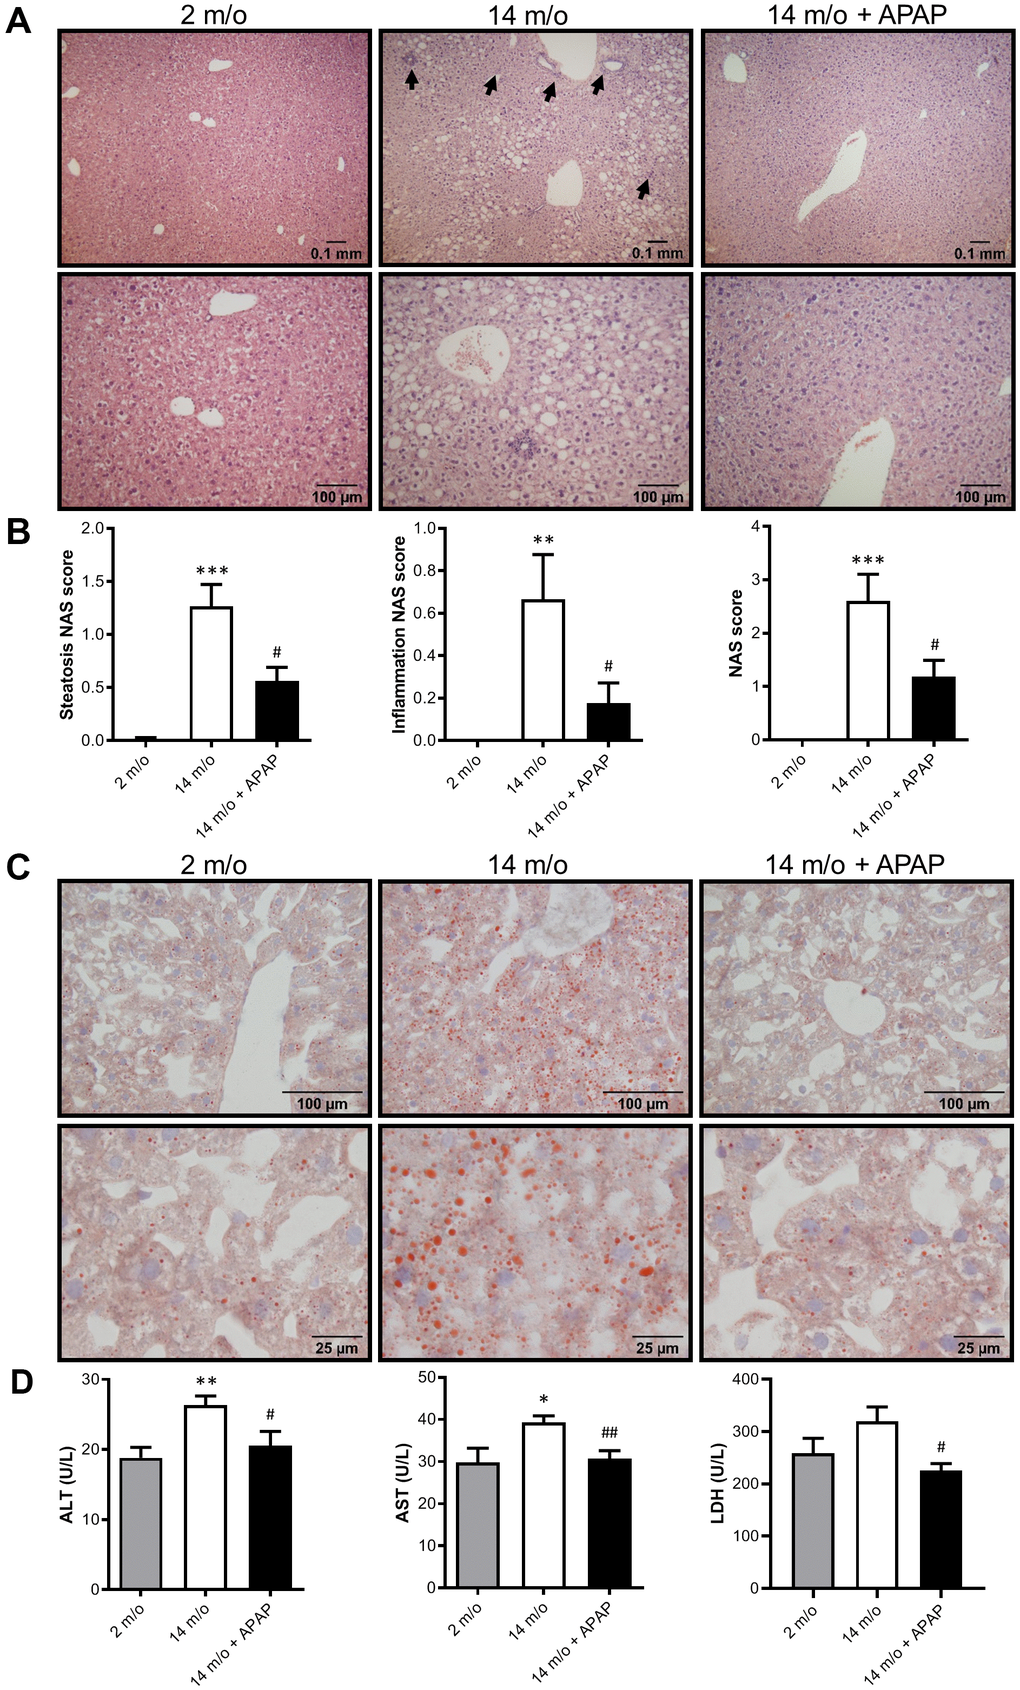 Chronic APAP exposure ameliorates the effect of age in liver alterations. (A, C) Representative images (10X and 20X) of H&E (A) and Oil Red O (C) staining performed on various sections of livers from 2 m/o, 14 m/o and 14 m/o + APAP mice. (B) Steatosis NAS score, inflammation NAS score, and total NAS score. (D) Plasma ALT, AST and LDH levels from 2 m/o, 14 m/o and 14 m/o + APAP mice. Values are expressed in international units per liter (U/L). Data are represented as the mean ± S.E.M. (n = 6-18 mice per group). Statistical analysis was performed by one-way ANOVA or Brown-Forsythe and Welch ANOVA test followed by their respective post-hoc test. * P P P vs. 2 m/o; #P ##P vs. 14 m/o.